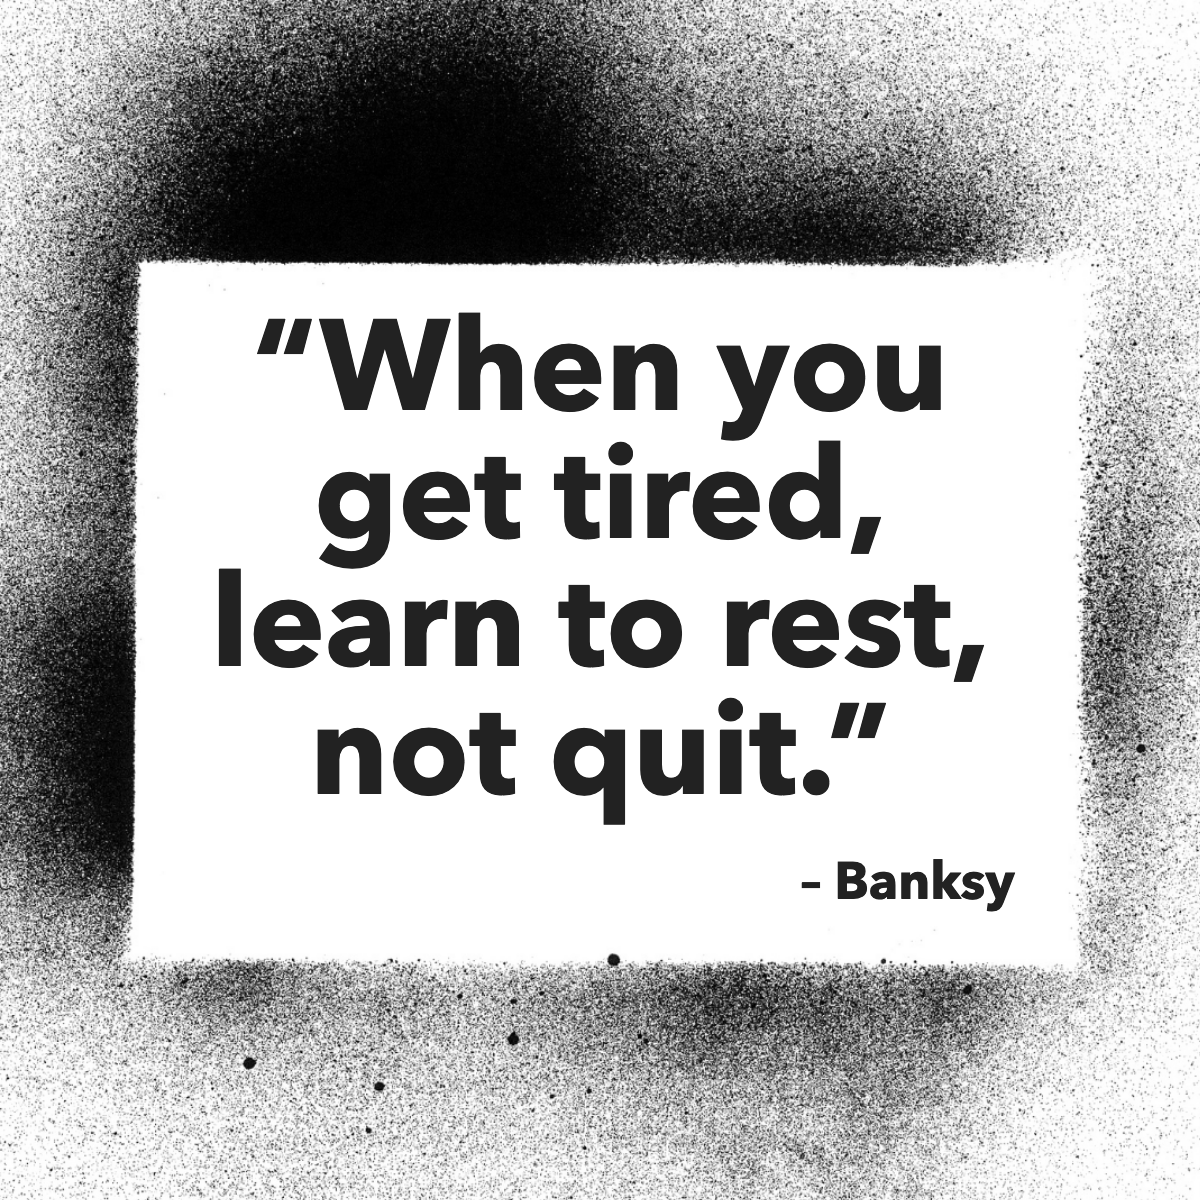 Don't feel guilty if you ever get tired, take your time ... 😉

#motivationnation #motivationalquotesdaily #quoteoftheday #quoteofday #quotedaily

 #YourPerfectHome #CRayBrower #SanJoaquinCounty #StocktonCA #RealEstate